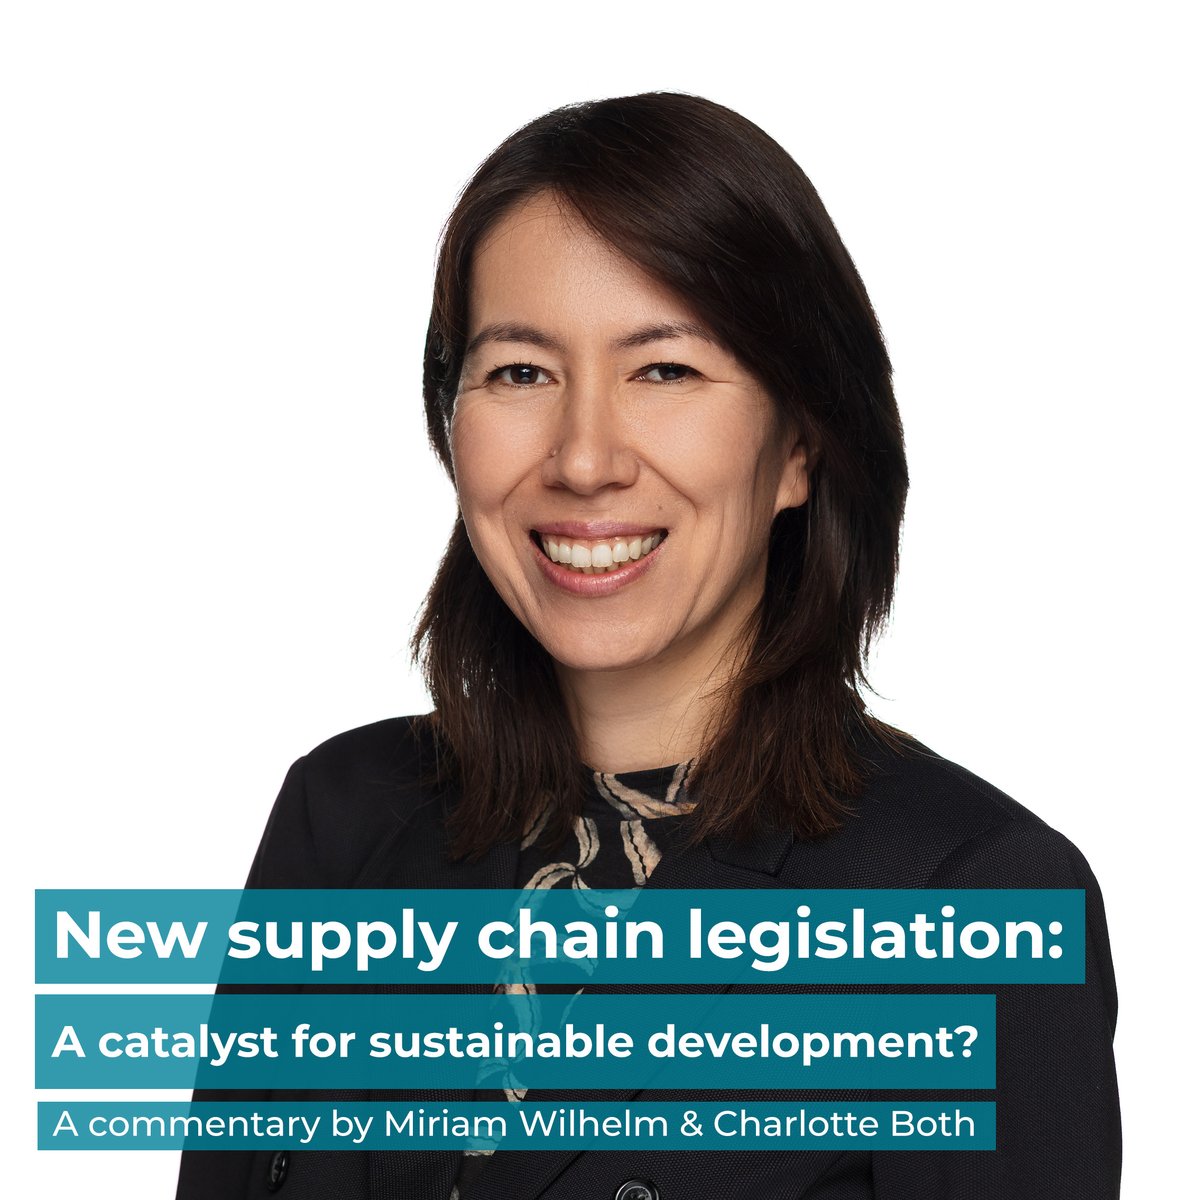 The Corporate Sustainability Due Diligence Directive requires companies to take responsibility for the environment and human rights in their global supply chains. WU’s Miriam Wilhelm and Charlotte Both discuss both its opportunities and risks: short.wu.ac.at/supplychainleg…